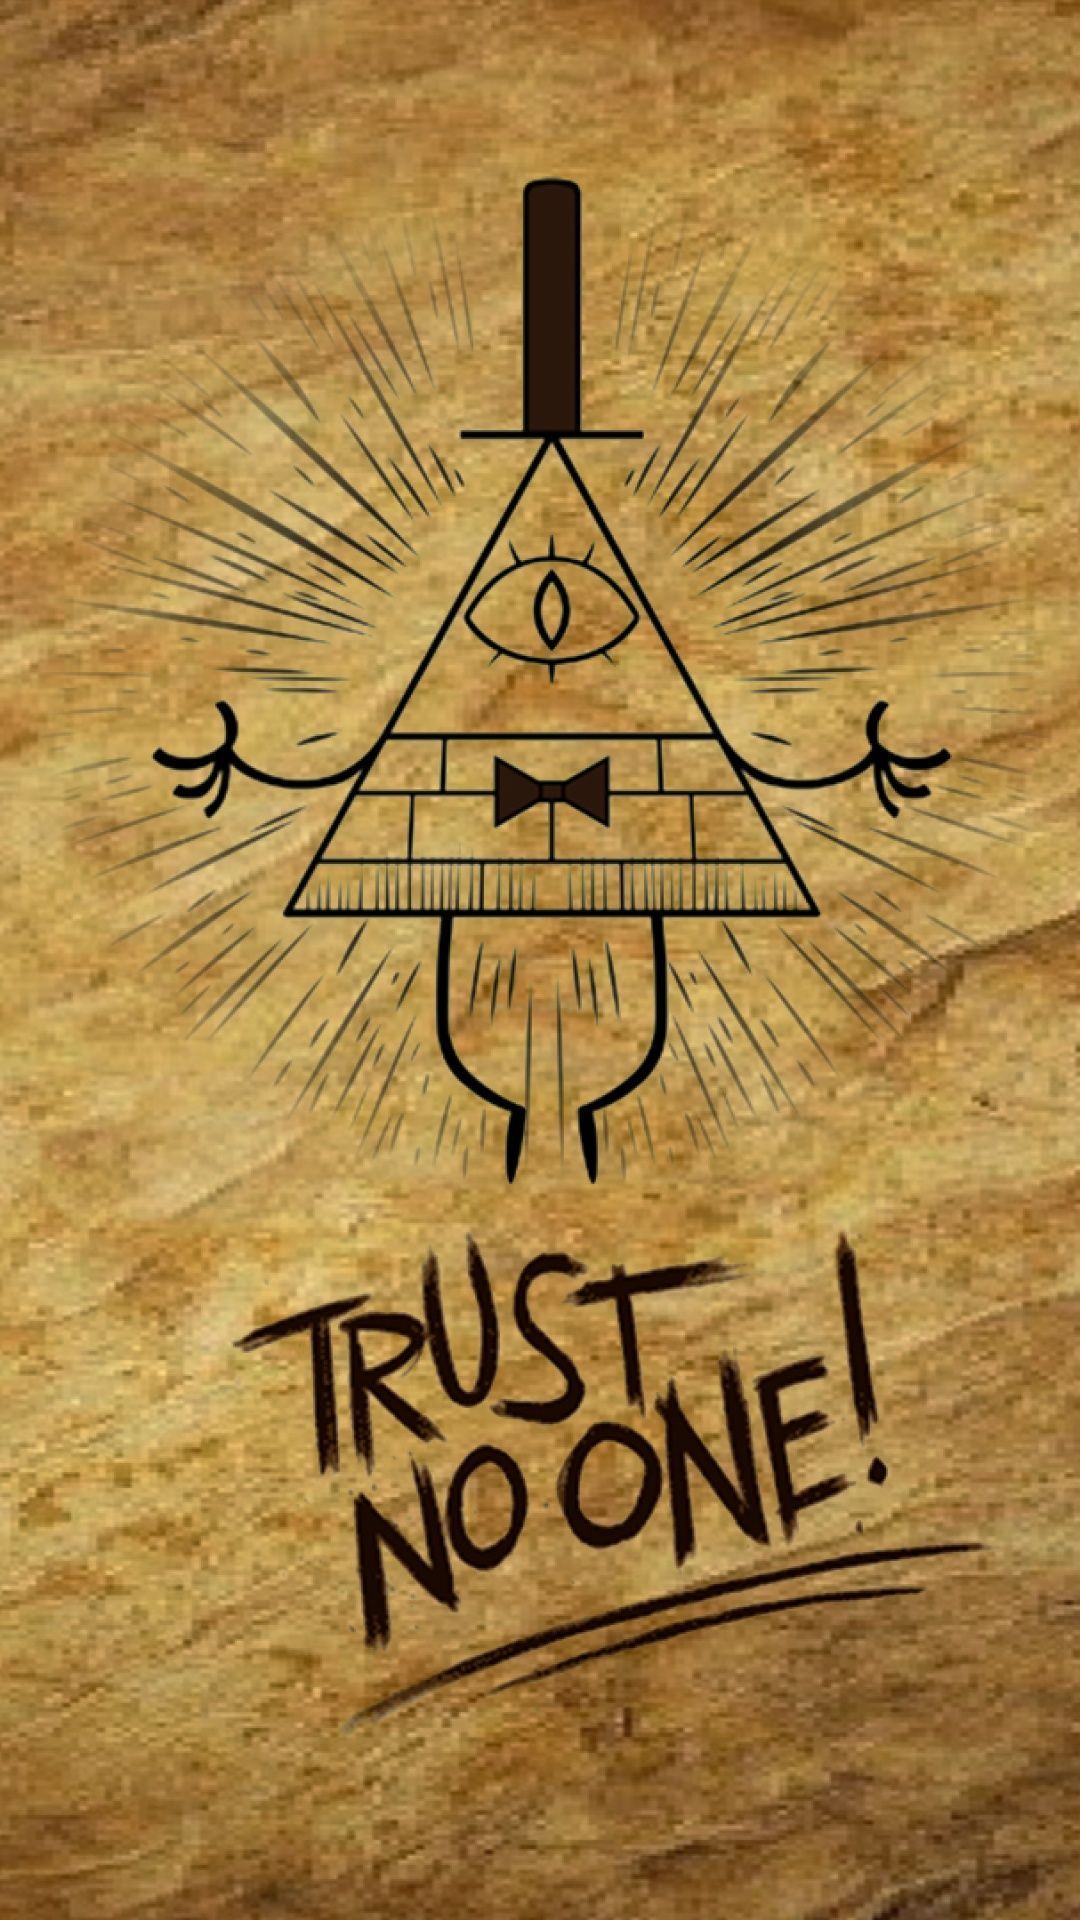 Background Gravity Falls Wallpaper Discover more wallpaper. /backg. Gravity falls art, Gravity falls bill cipher, iPhone wallpaper fall